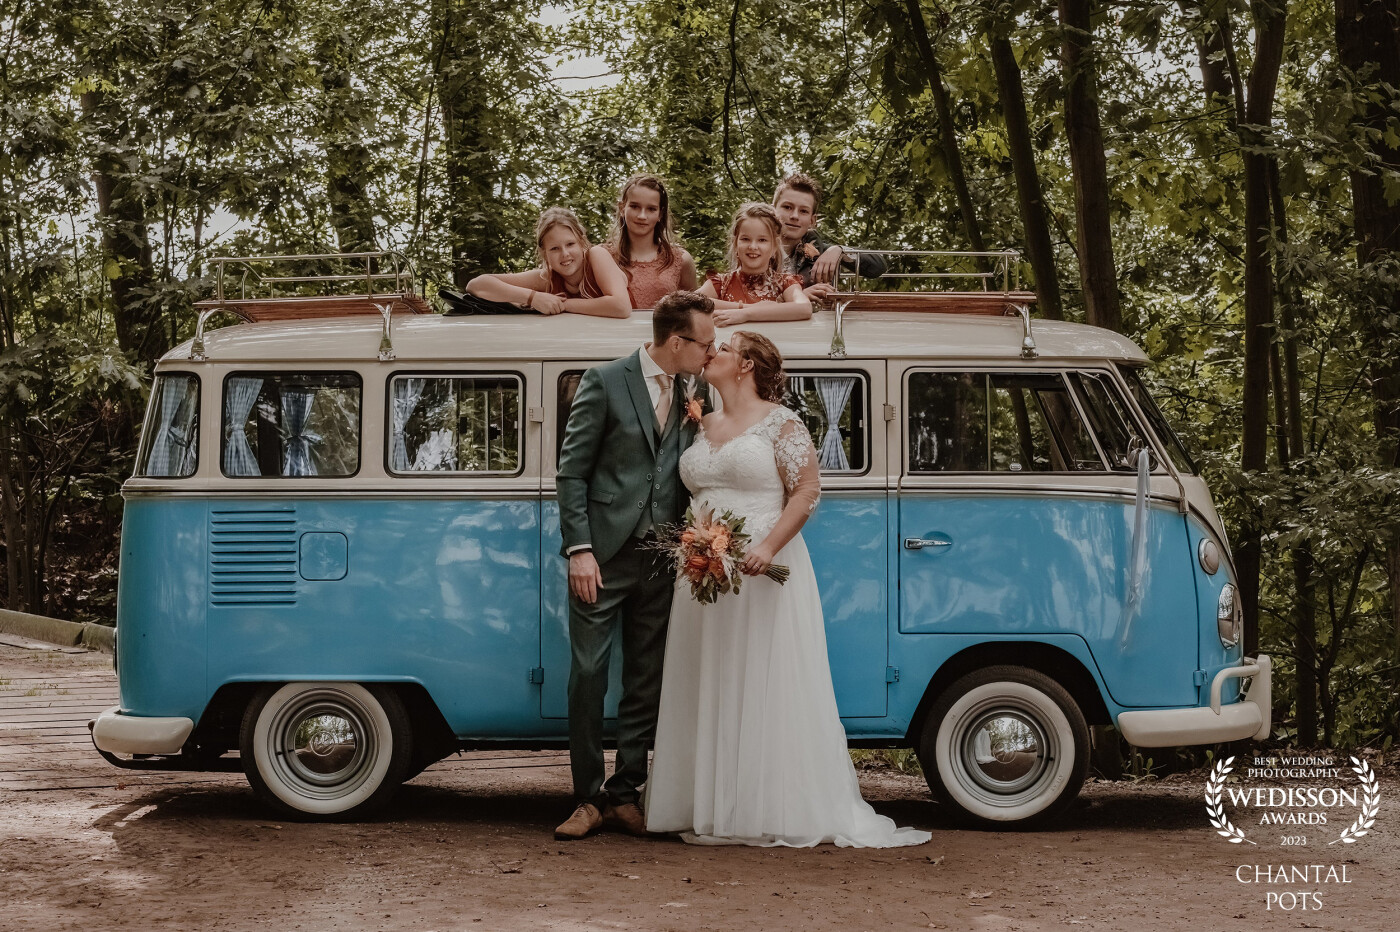 This beautiful couple chose to go to their wedding location in a Volkswagen T2. Of course we stopped along the way to take pictures with their children in this amazing vehicle.